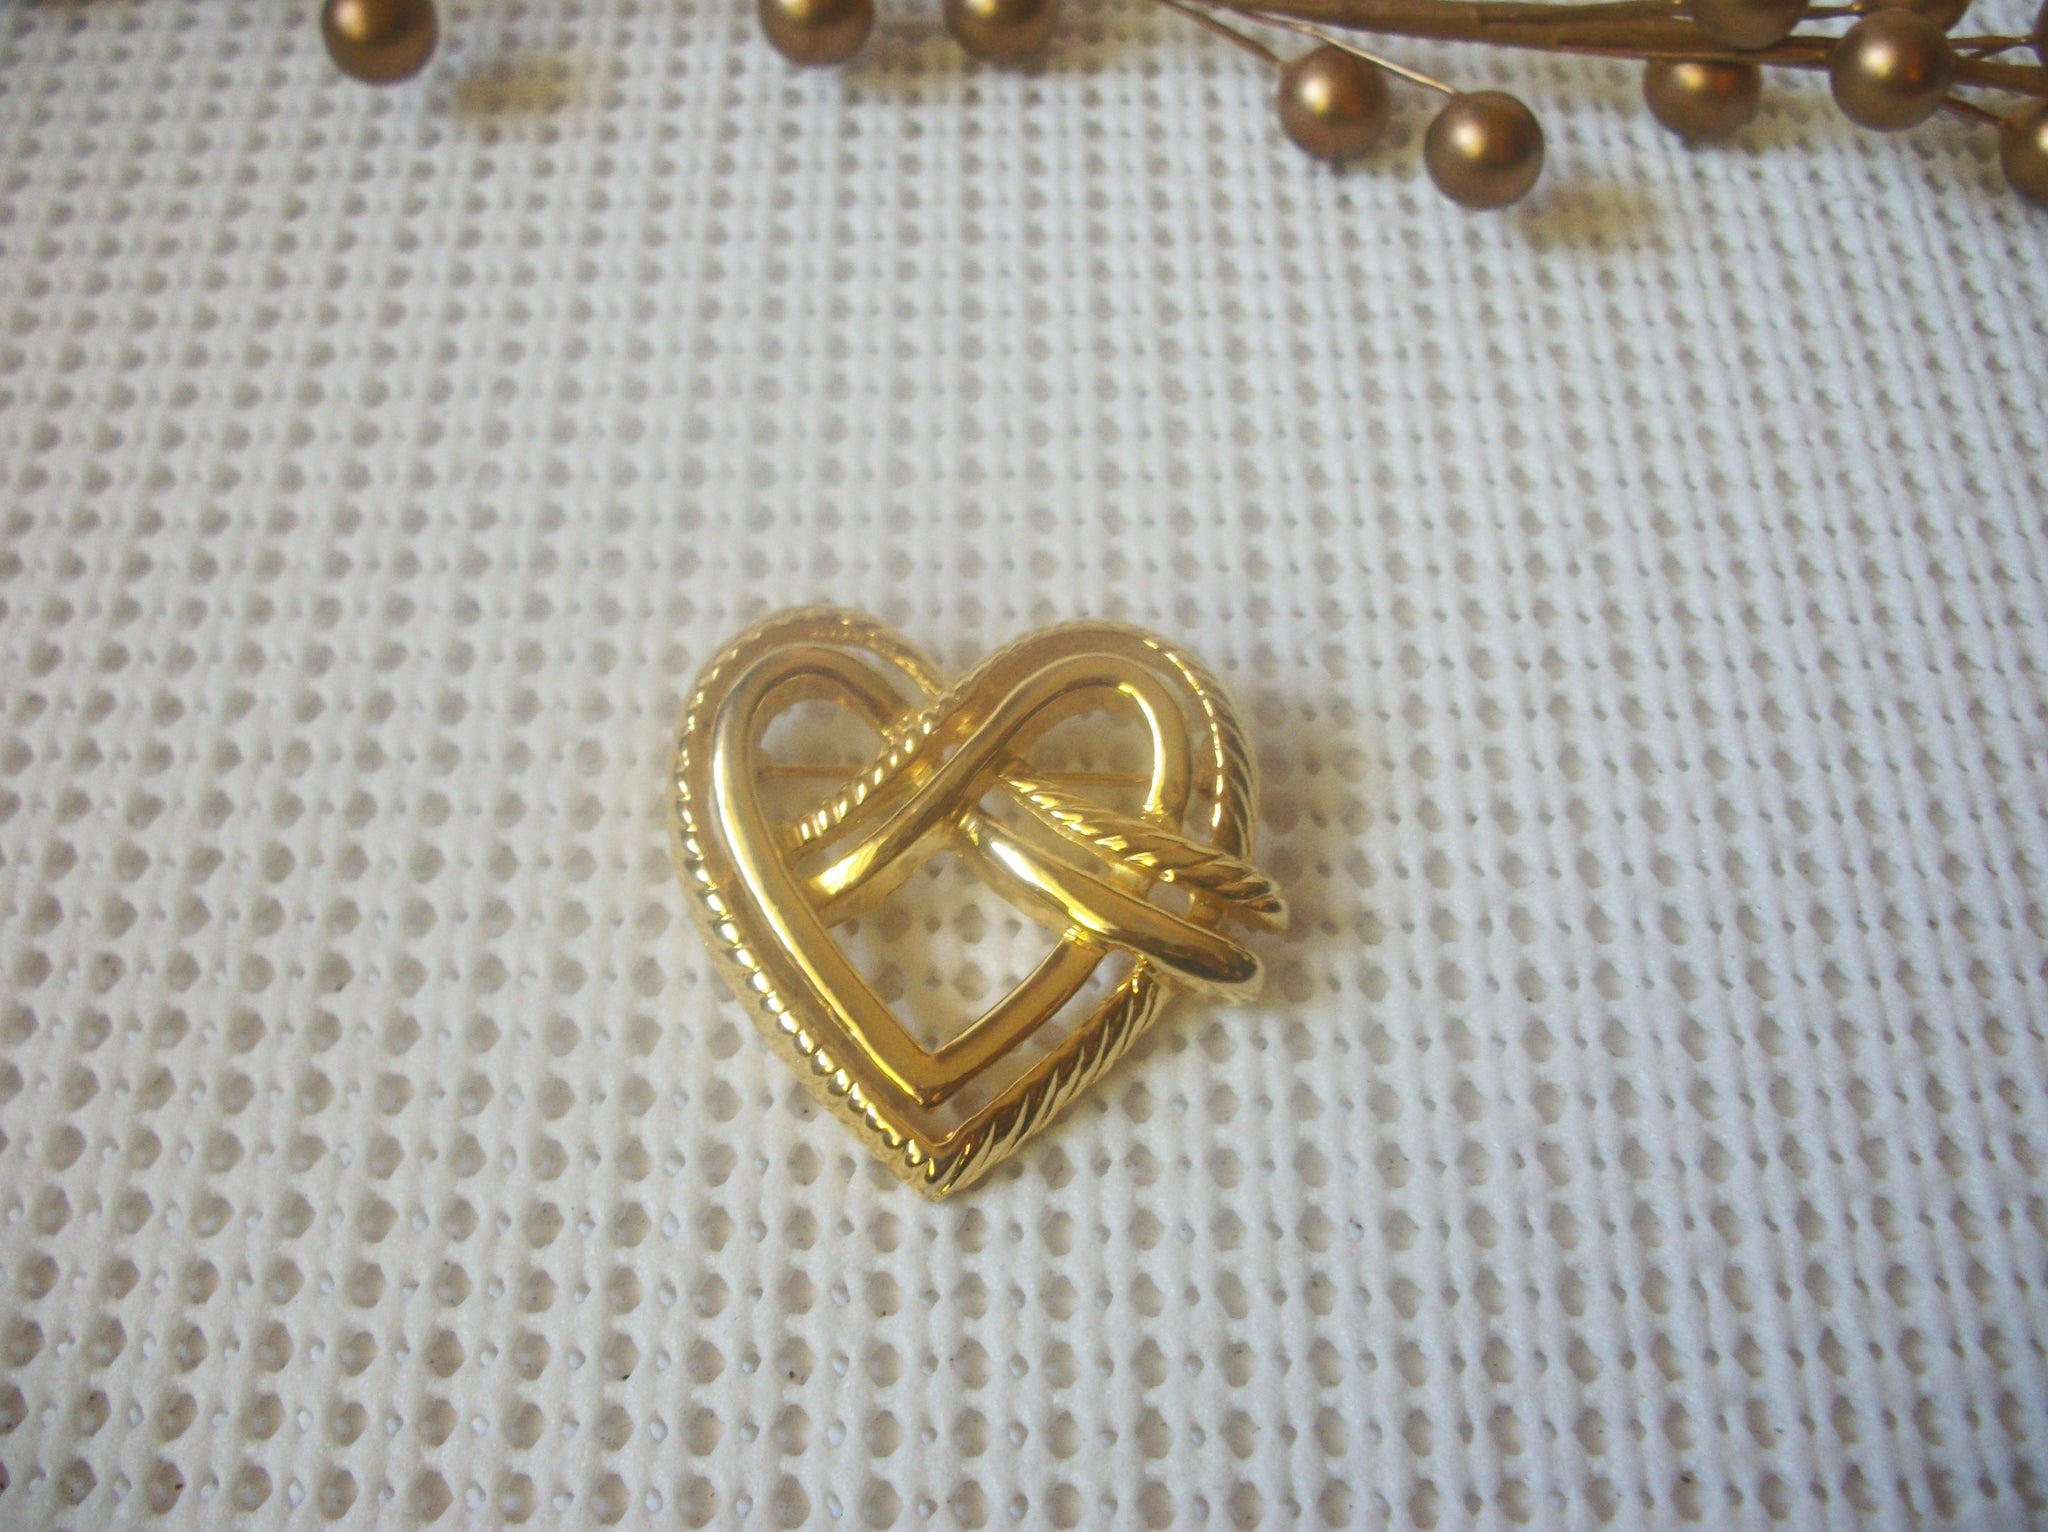 Vintage Jewelry, Intertwining Heart Love Forever, Gold Tone,52017